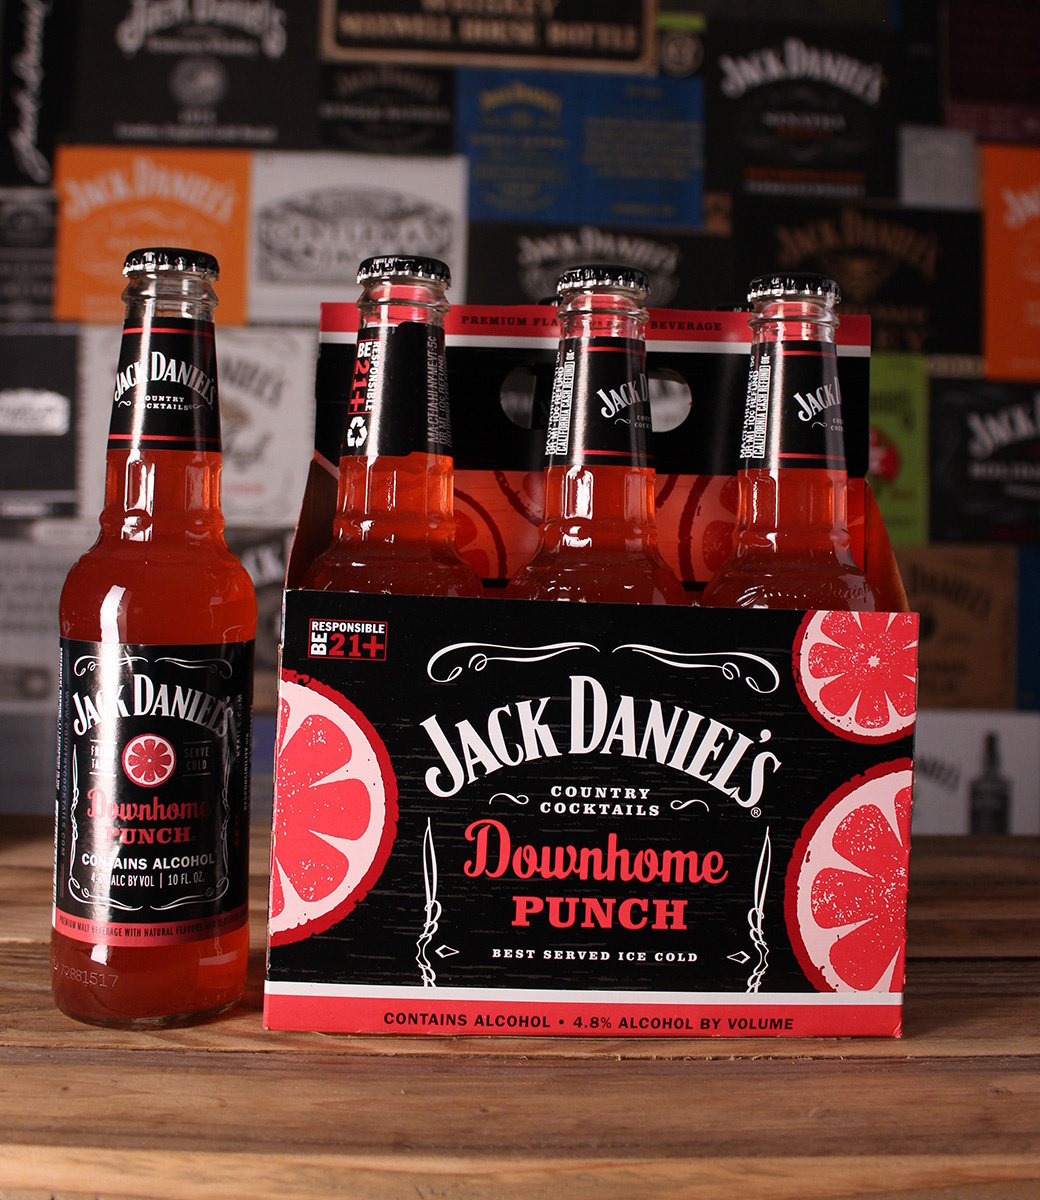 JACK DANIEL'S - Country Cocktails - Downhome Punch - 4,8% - 297ml - Latest Generation